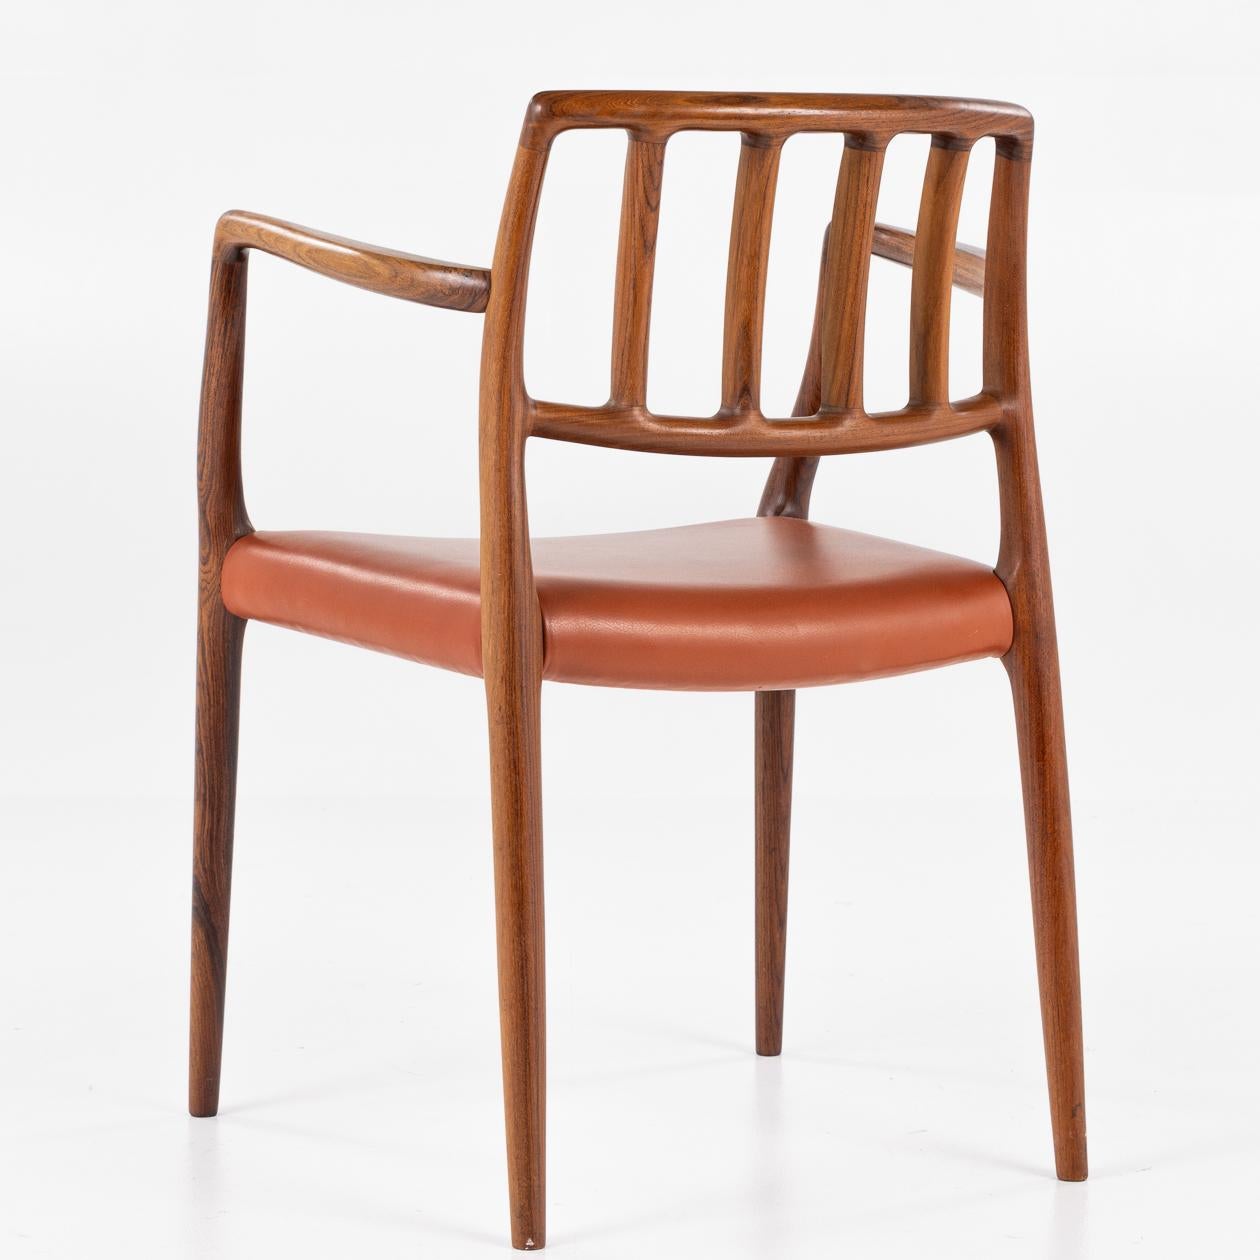 NO 66 - Armchair in rosewood and patinated leather seat. Niels O. Møller / J.L Møller